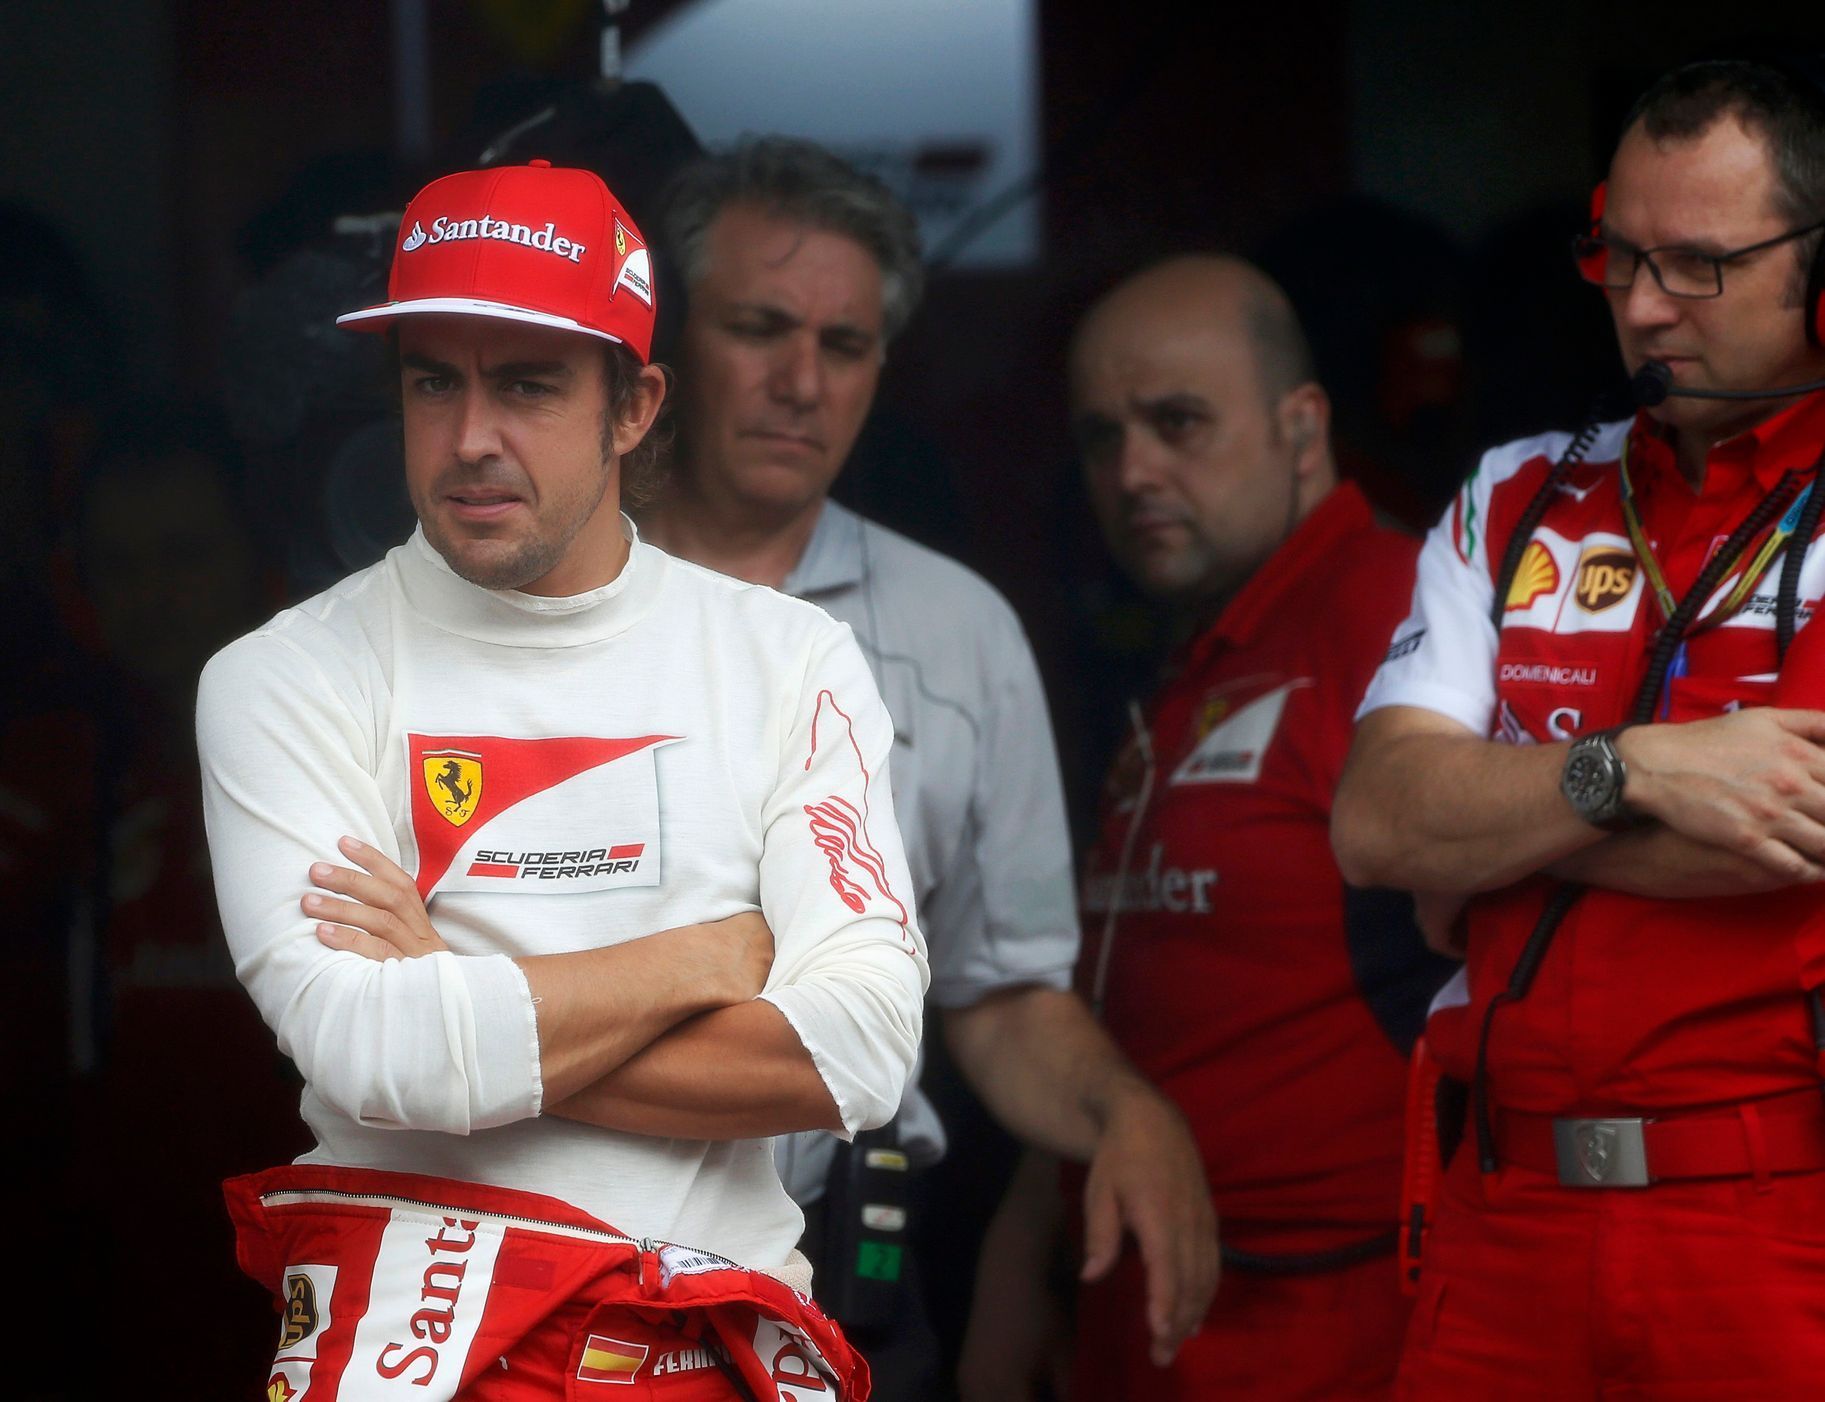 Ferrari Formula One driver Alonso of Spain waits out the rain in his team garage before the the qualifying session for the Malaysian F1 Grand Prix at Sepang International Circuit outside Kuala Lumpur